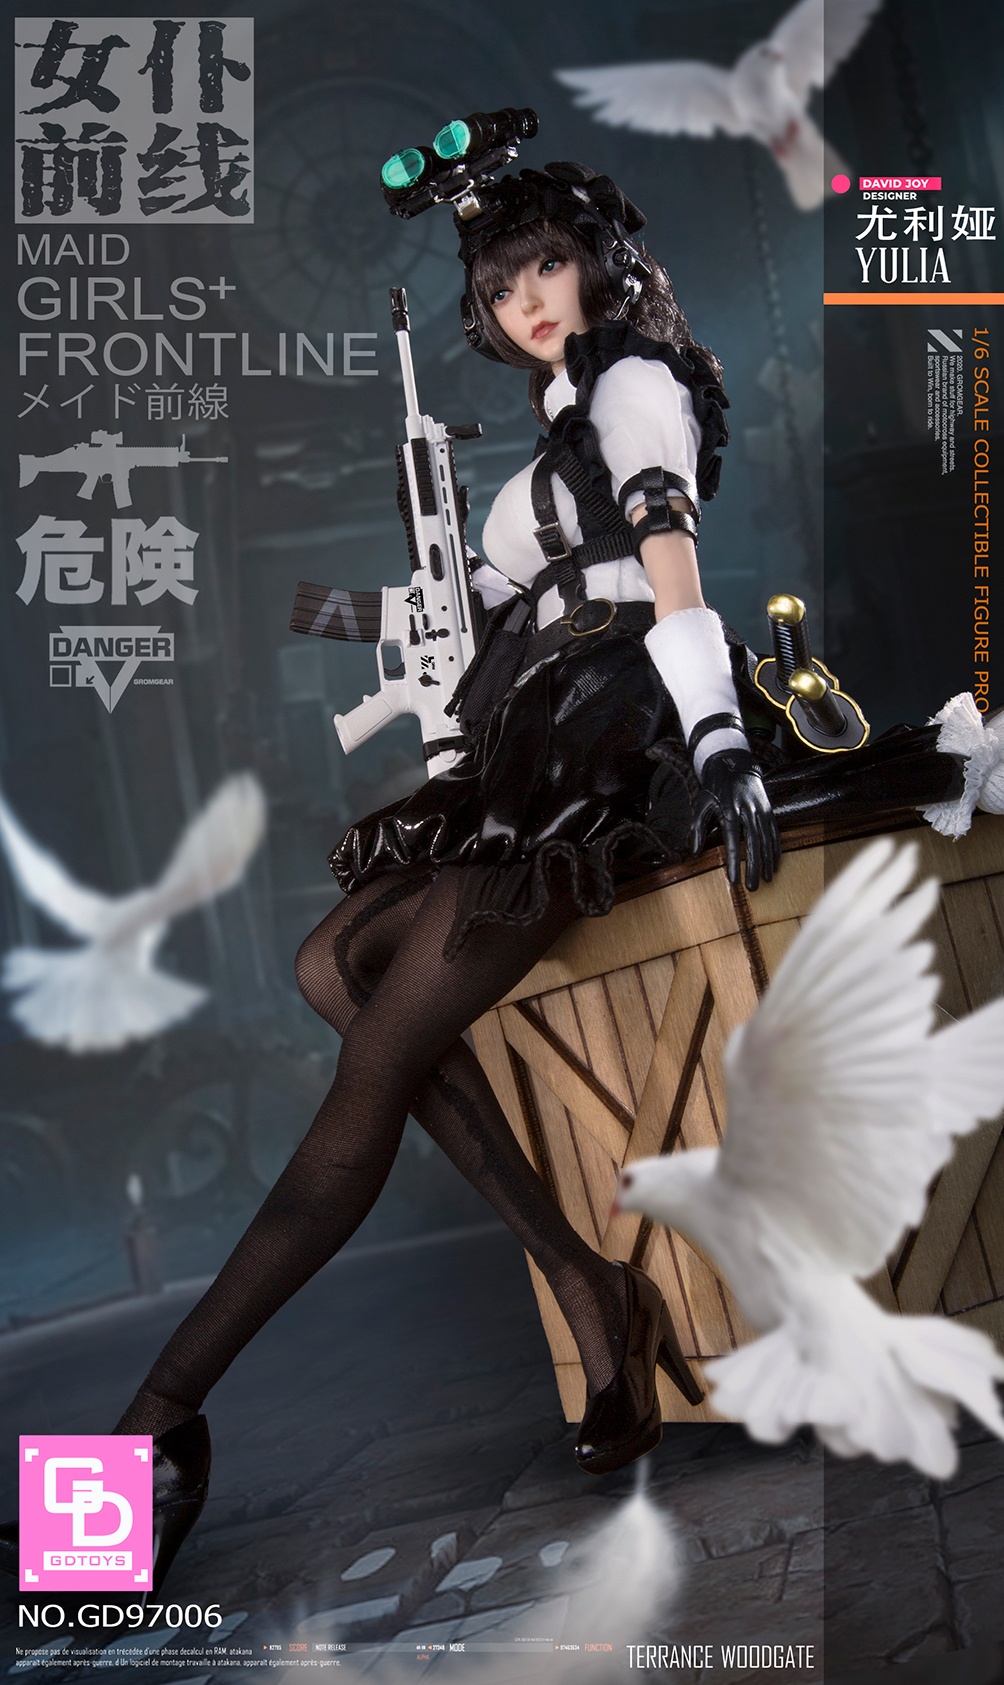 MaidGirls - NEW PRODUCT: GDTOYS: GD97006 1/6 Scale Maid Girls+ Frontline - YULIA 22563310